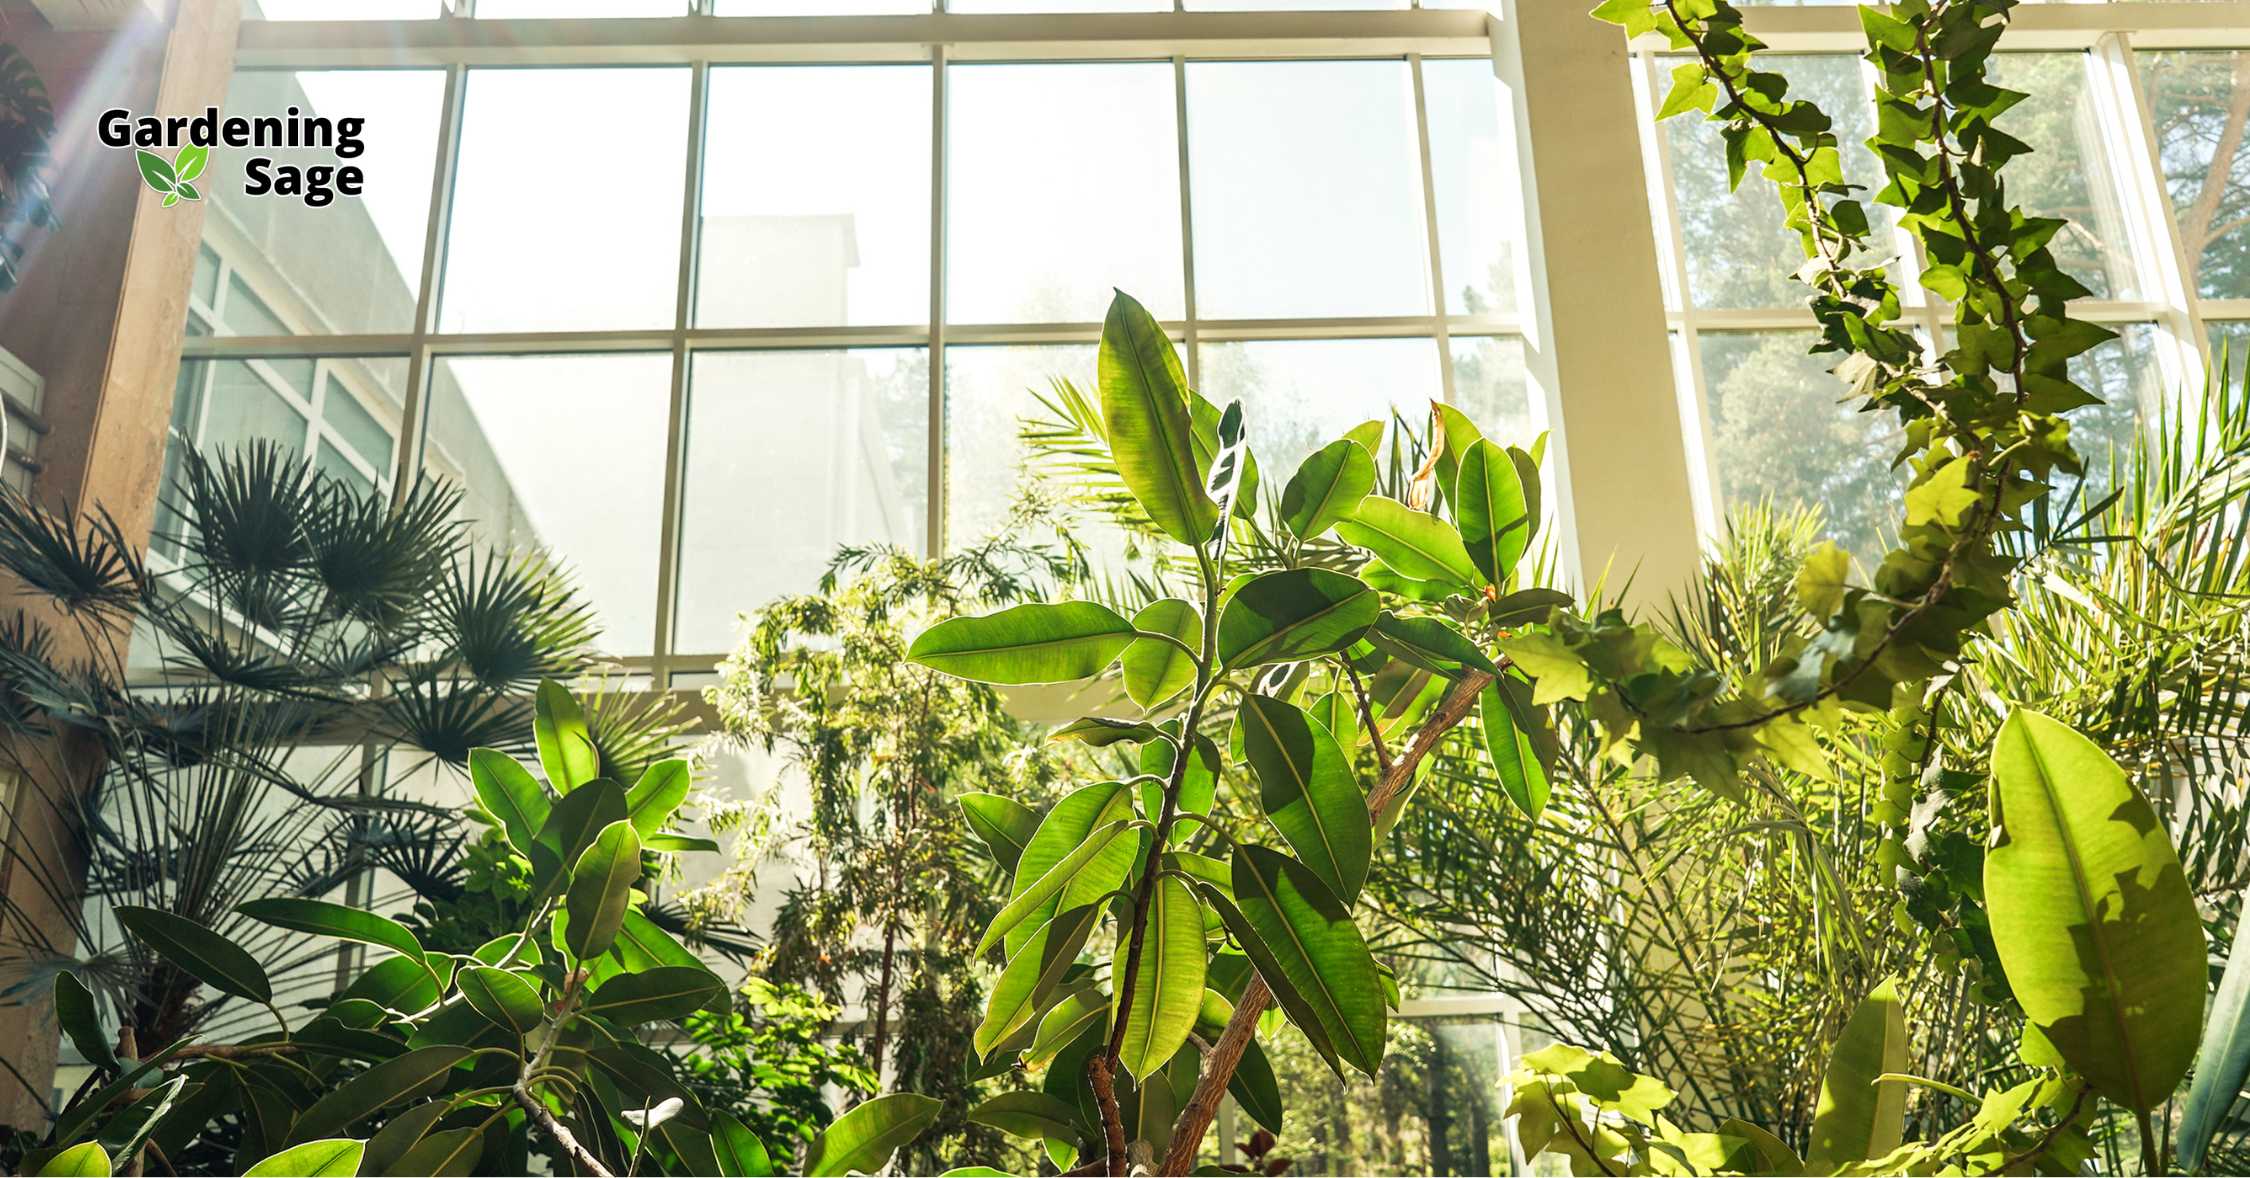 Lush green indoor plants thriving in a sunlit space with large windows, illustrating innovative and beautiful home garden solutions for urban living.